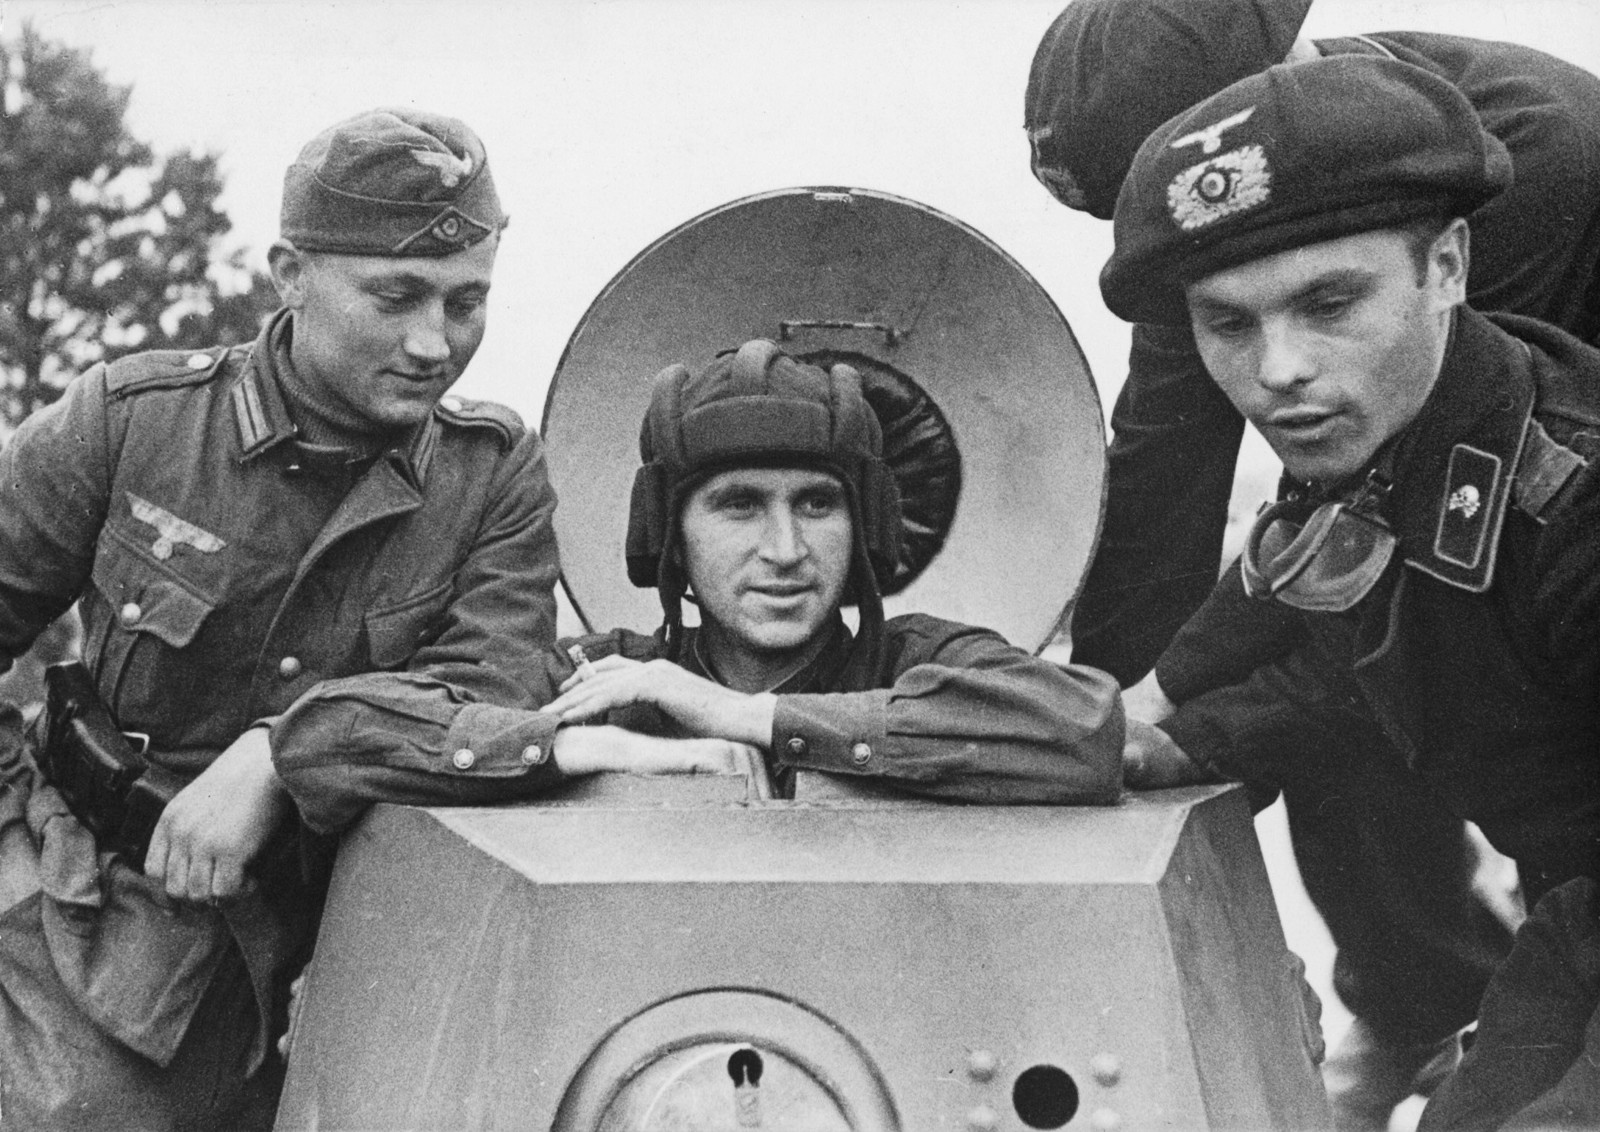 German soldiers having a friendly conversation with commander of Soviet armored vehicle БА-20 from the 29th Tank Brigade in Brest, Sept. 20, 1939 (Max Ehlert, bundesarchiv.de)